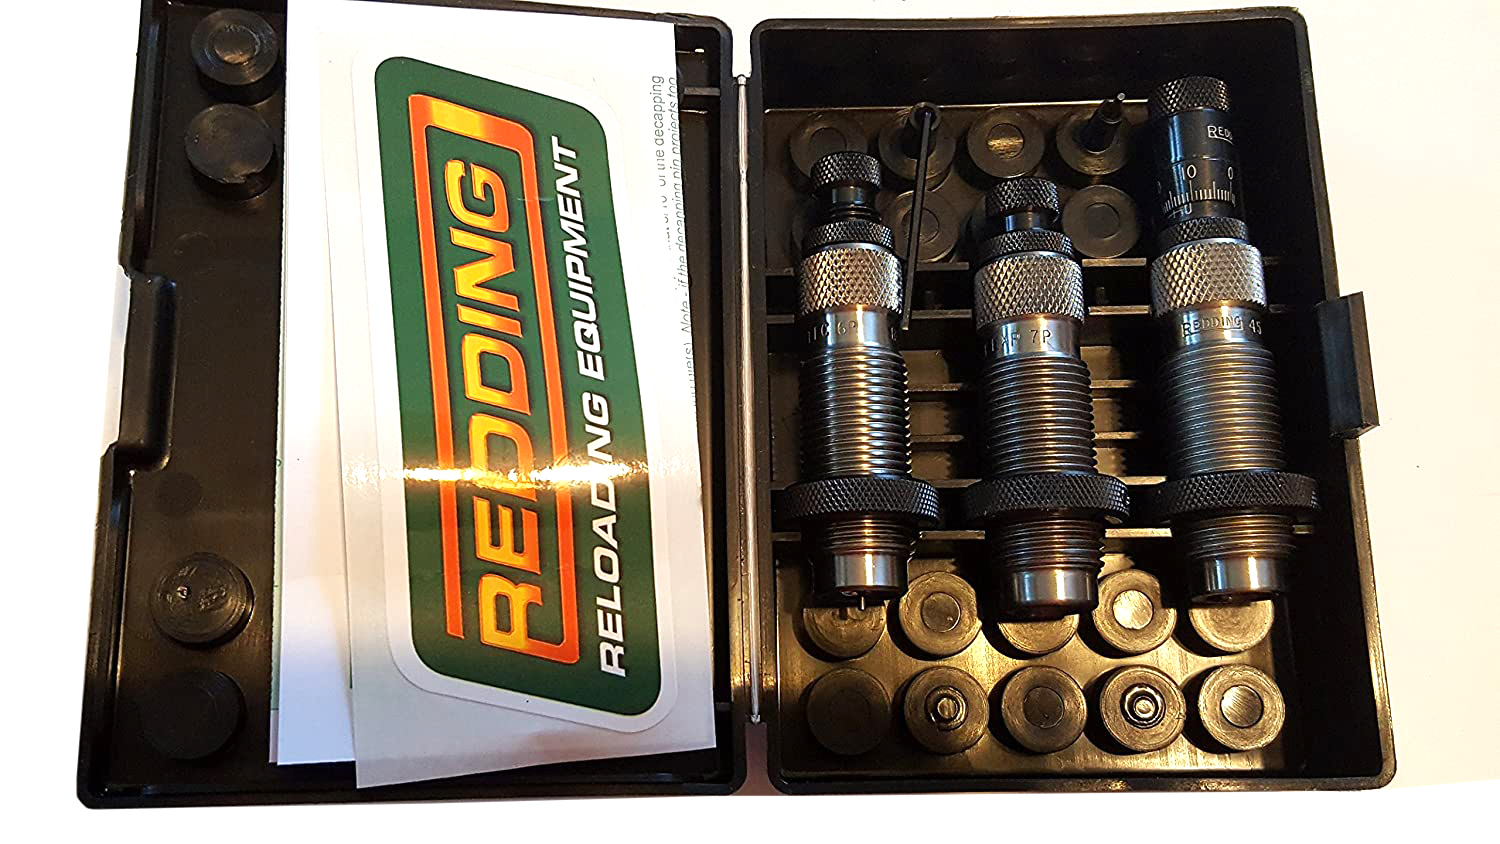 Redding Reloading Premium Set Up to 31% Off Customer Rated w/ Free Shipping and Handling